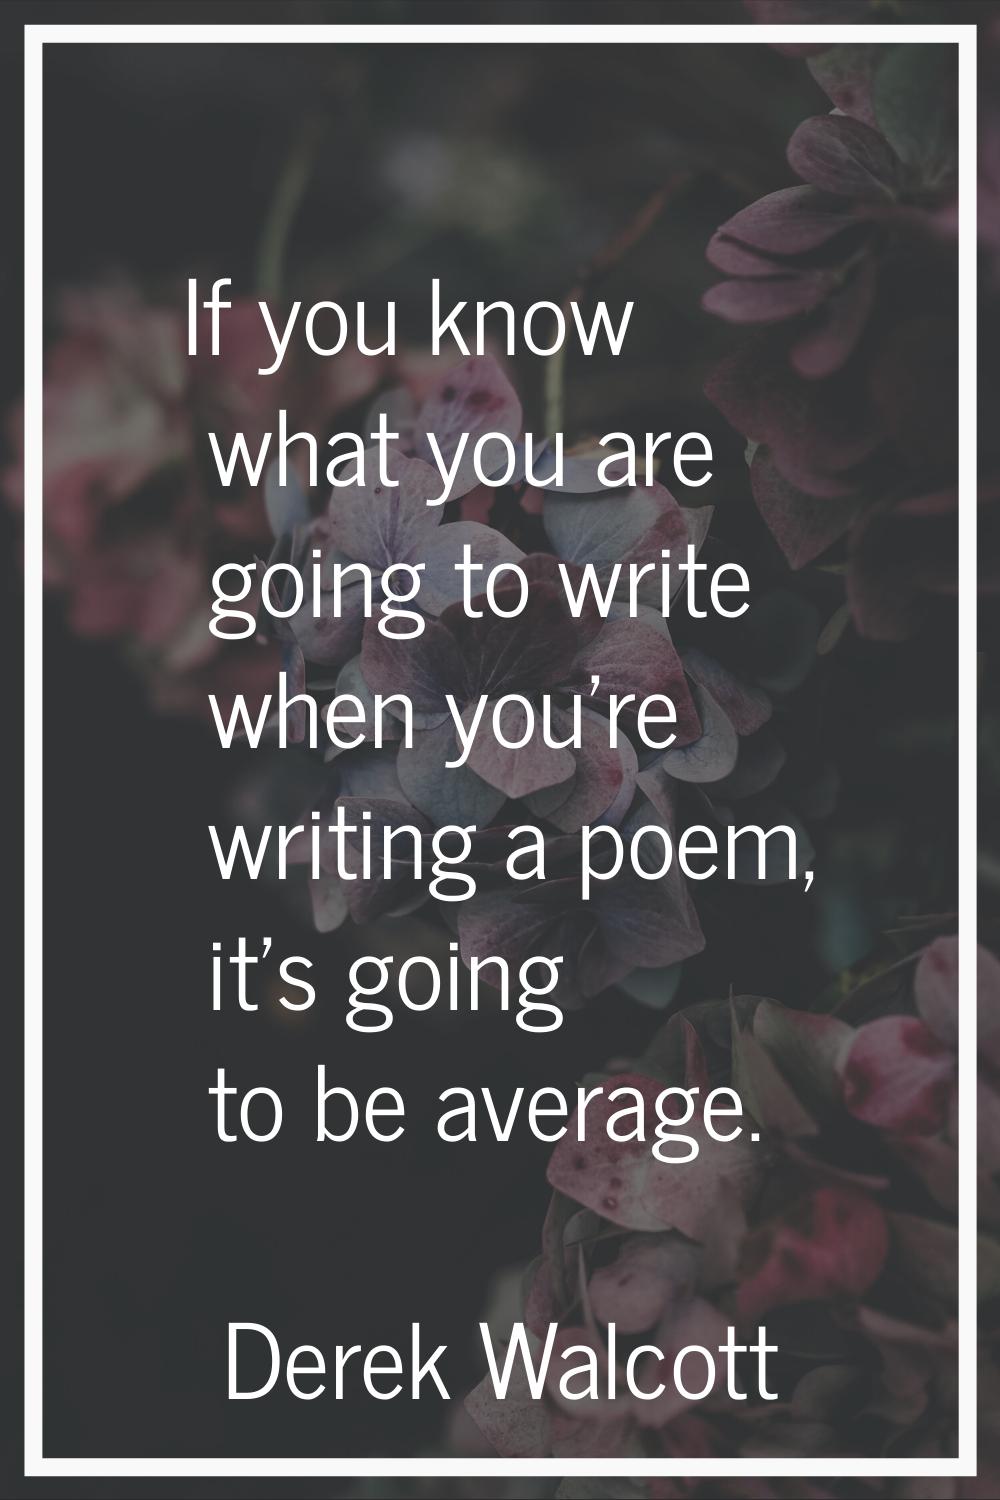 If you know what you are going to write when you're writing a poem, it's going to be average.